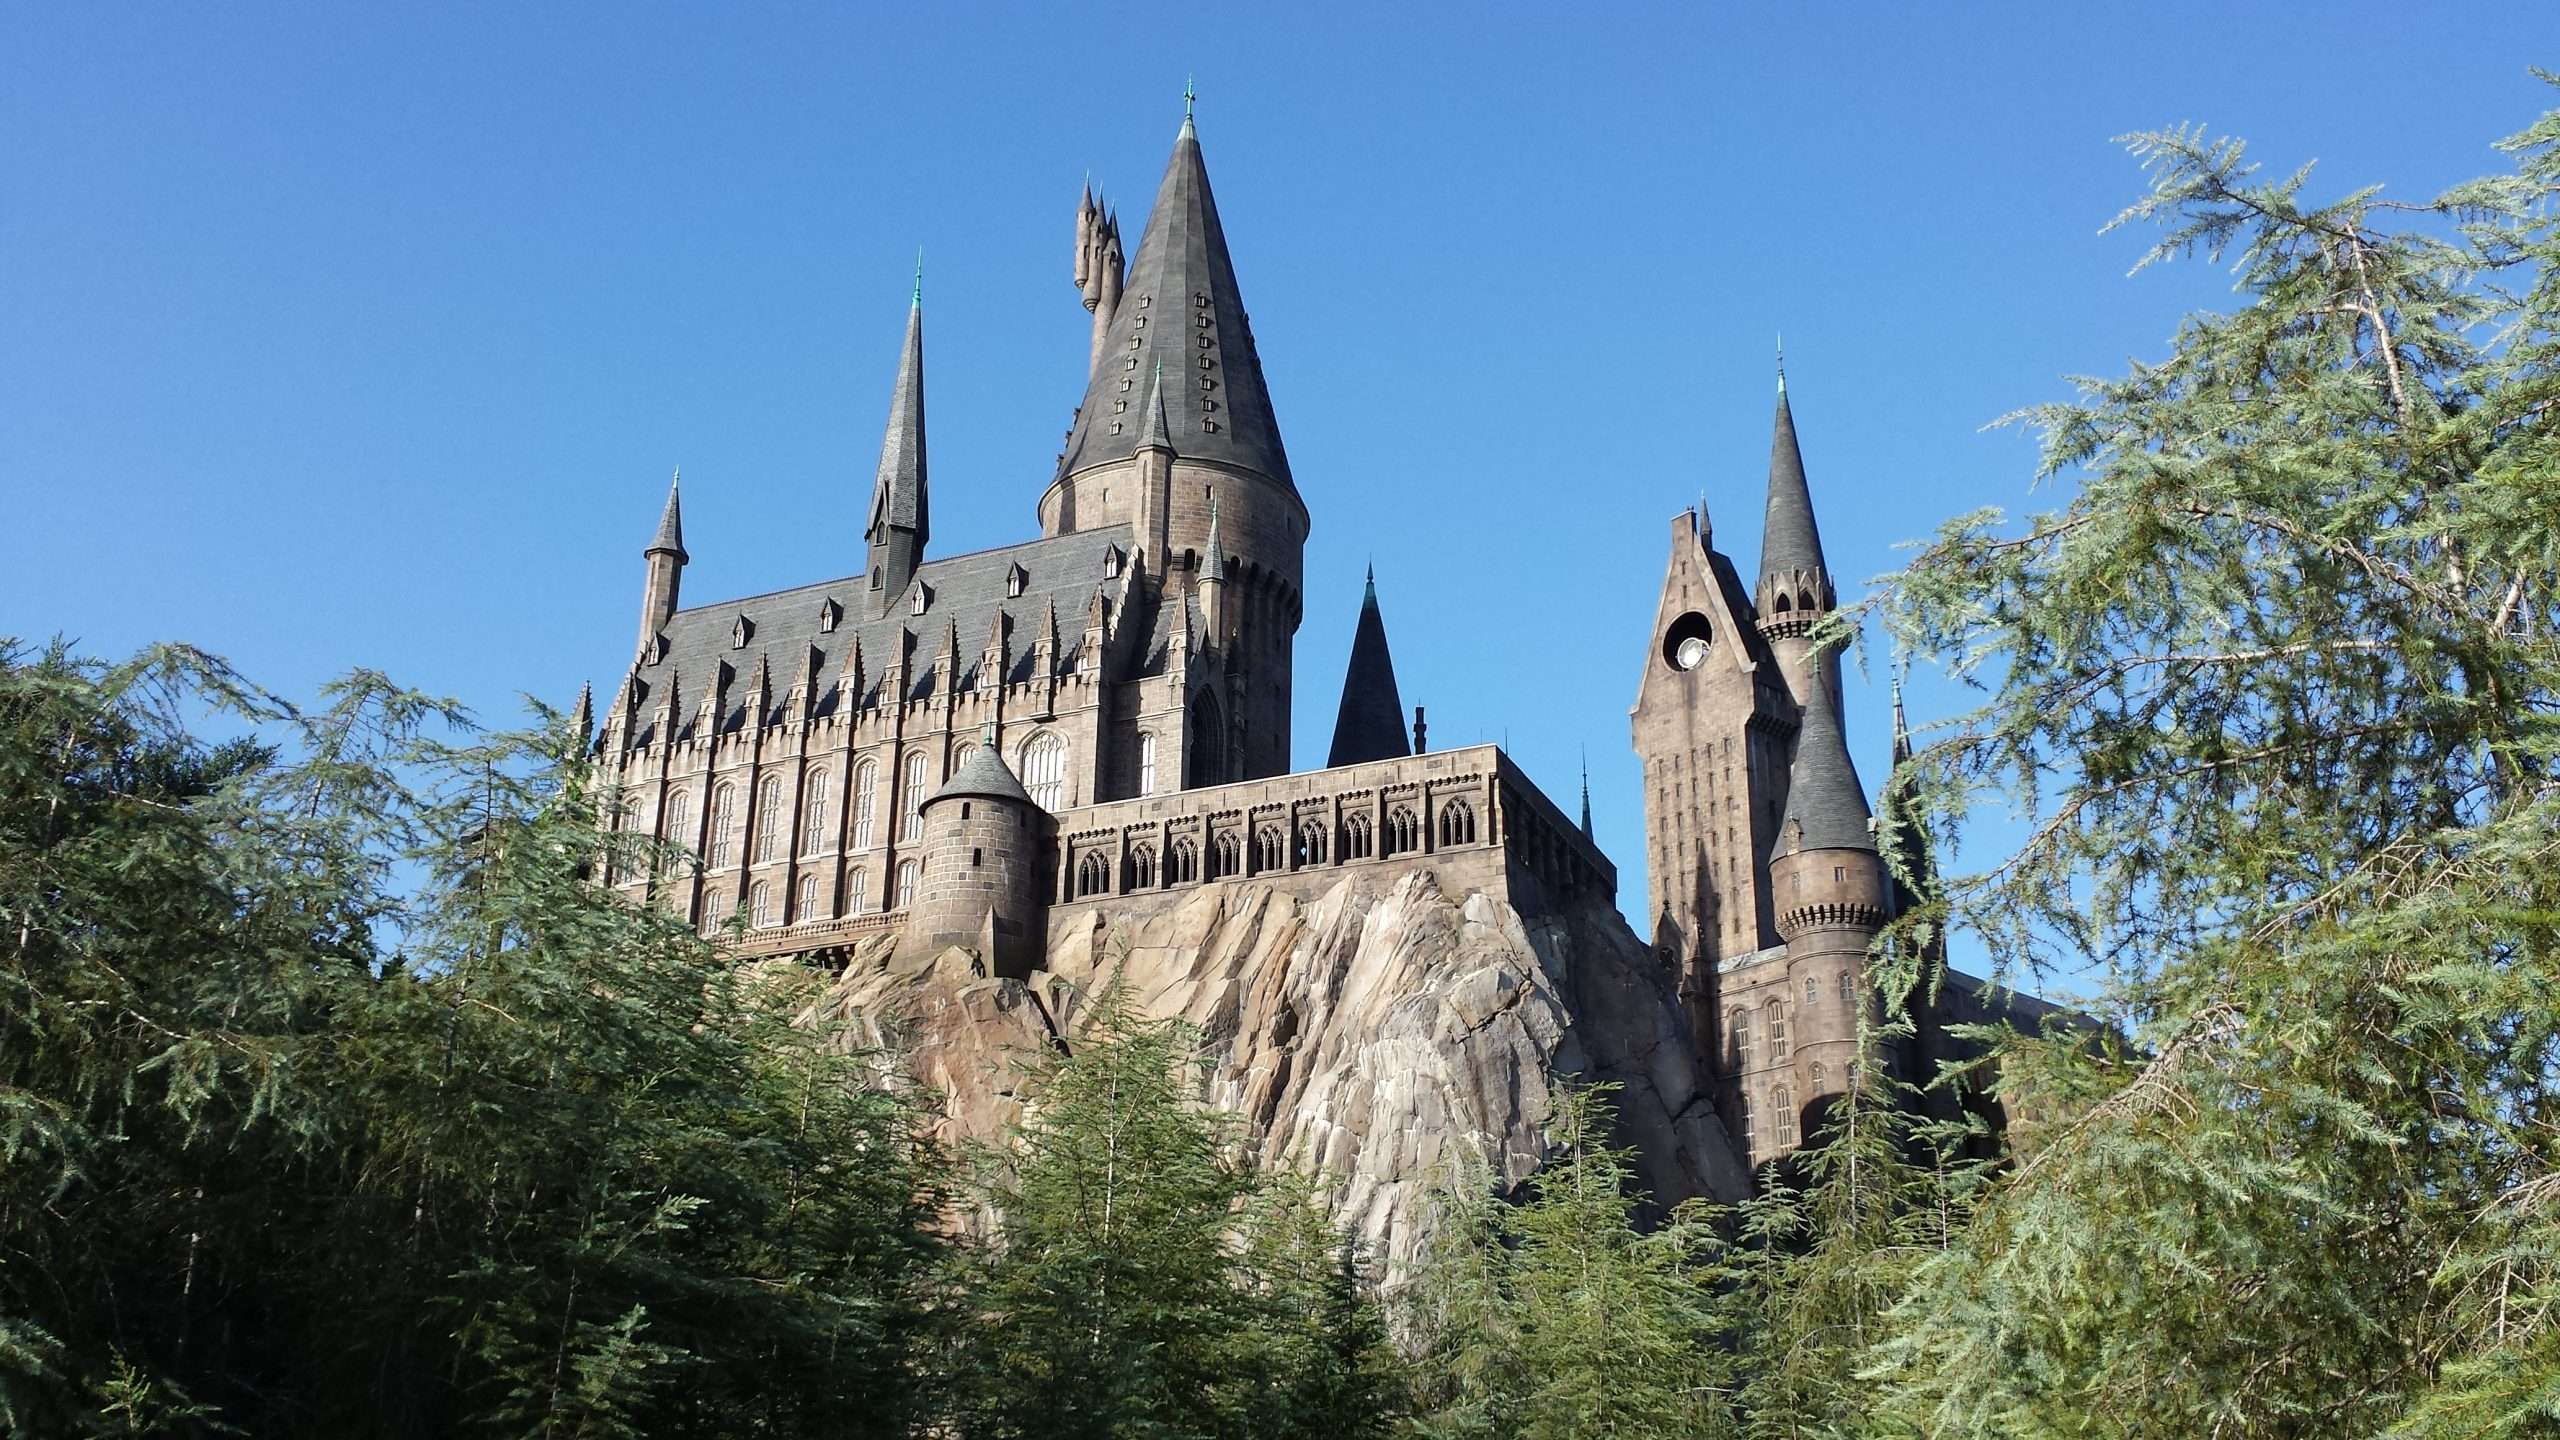 My Harry Potter Guide To Universalâs Hogsmeade